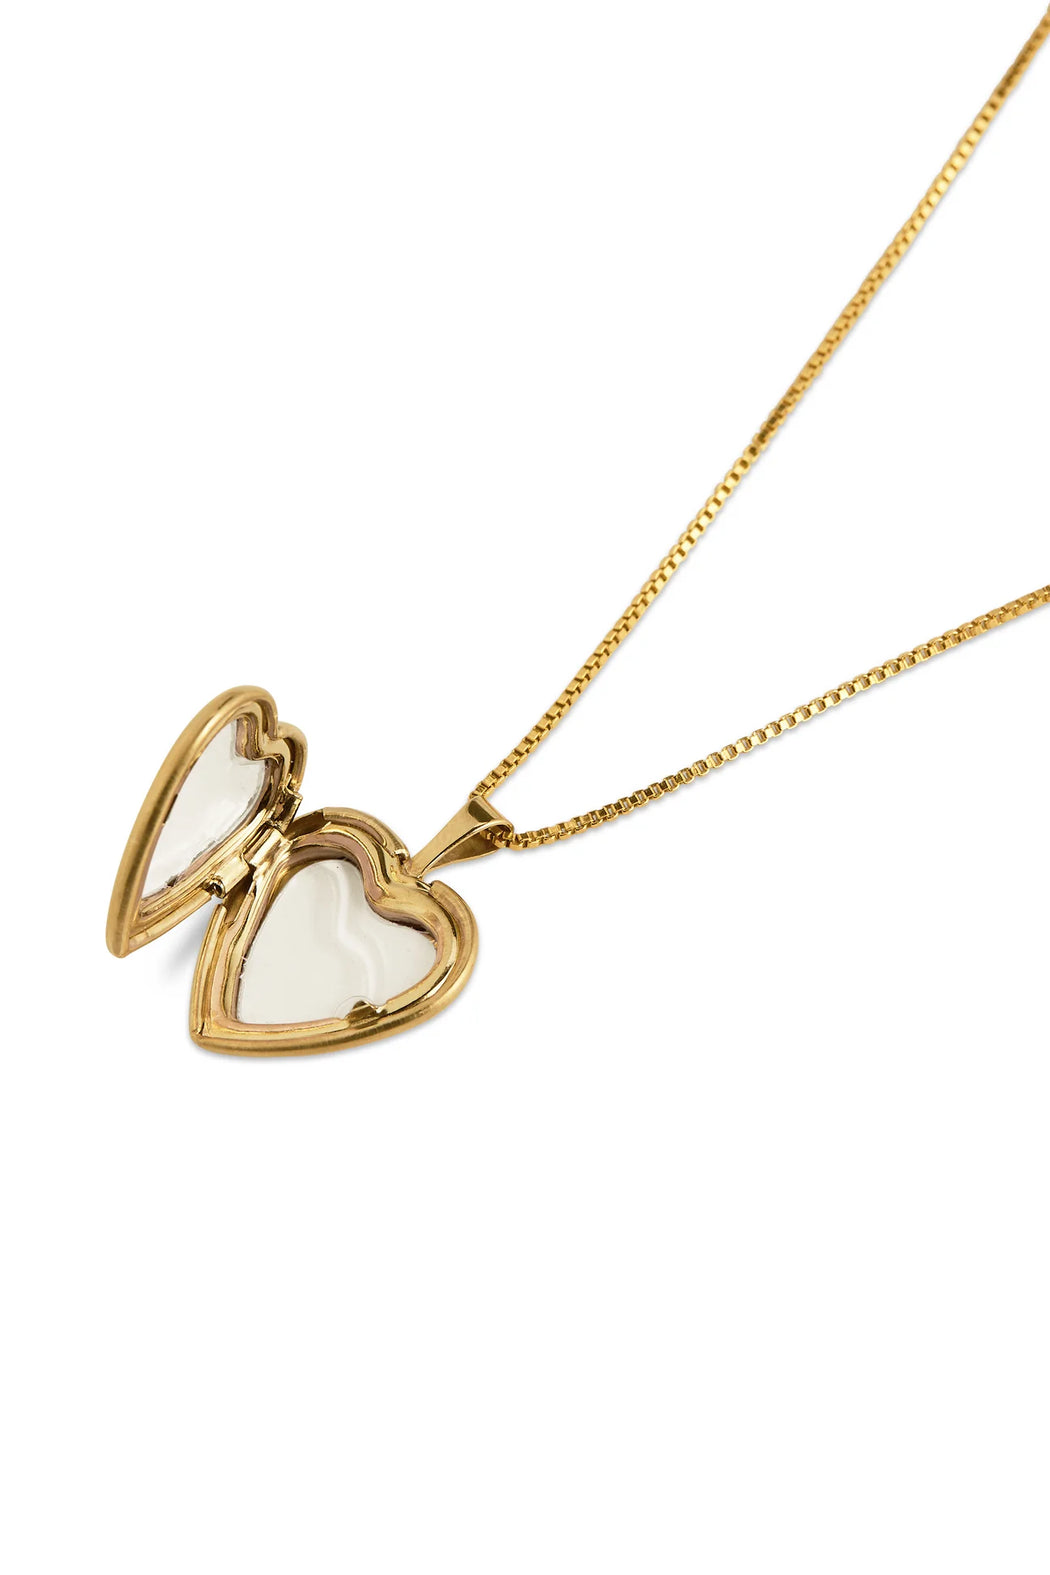 THE HEART OF GOLD LOCKET